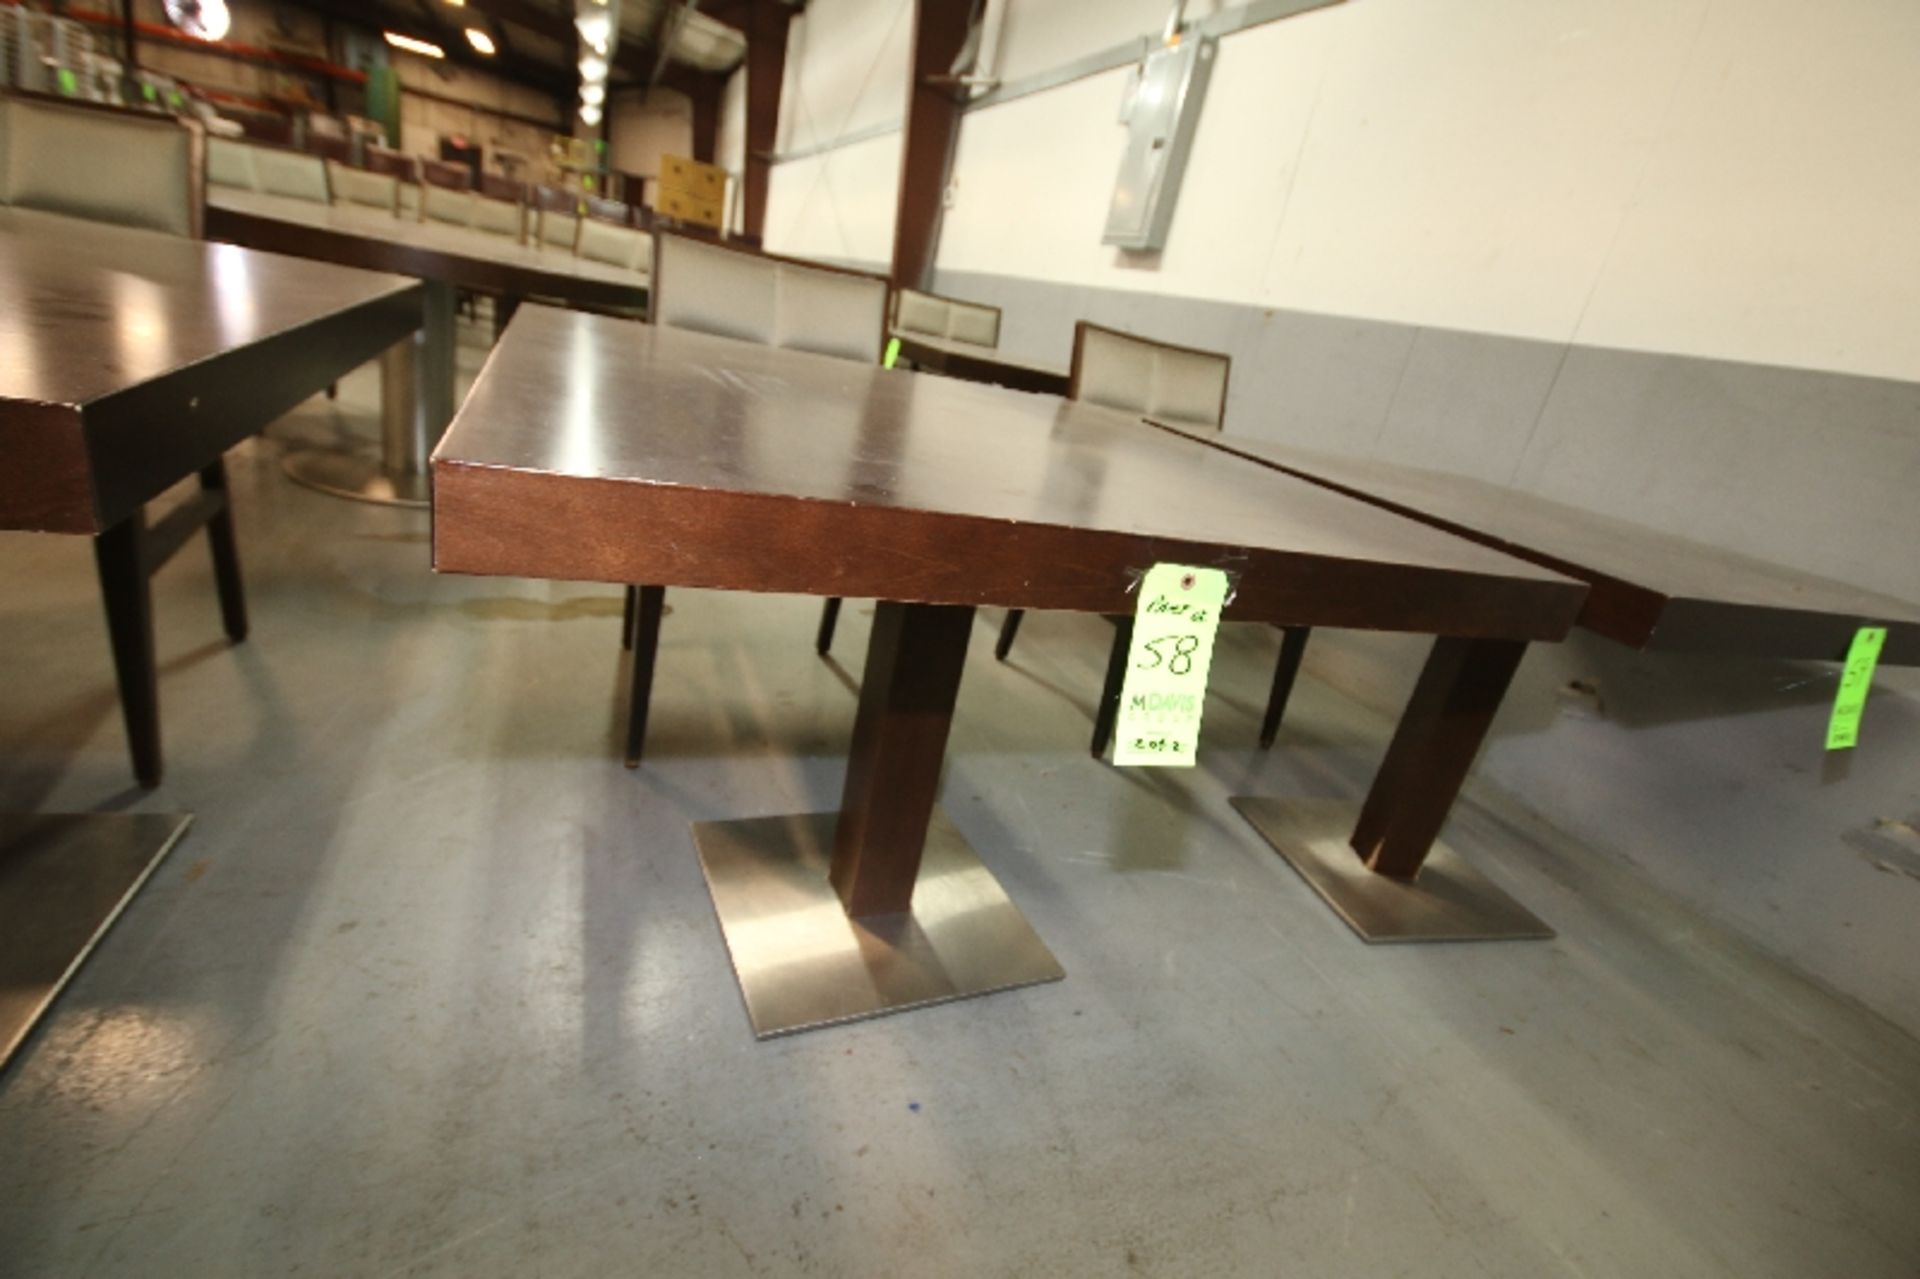 Aprox. 39" x 39" Walnut Color Wood Tables - Image 3 of 4